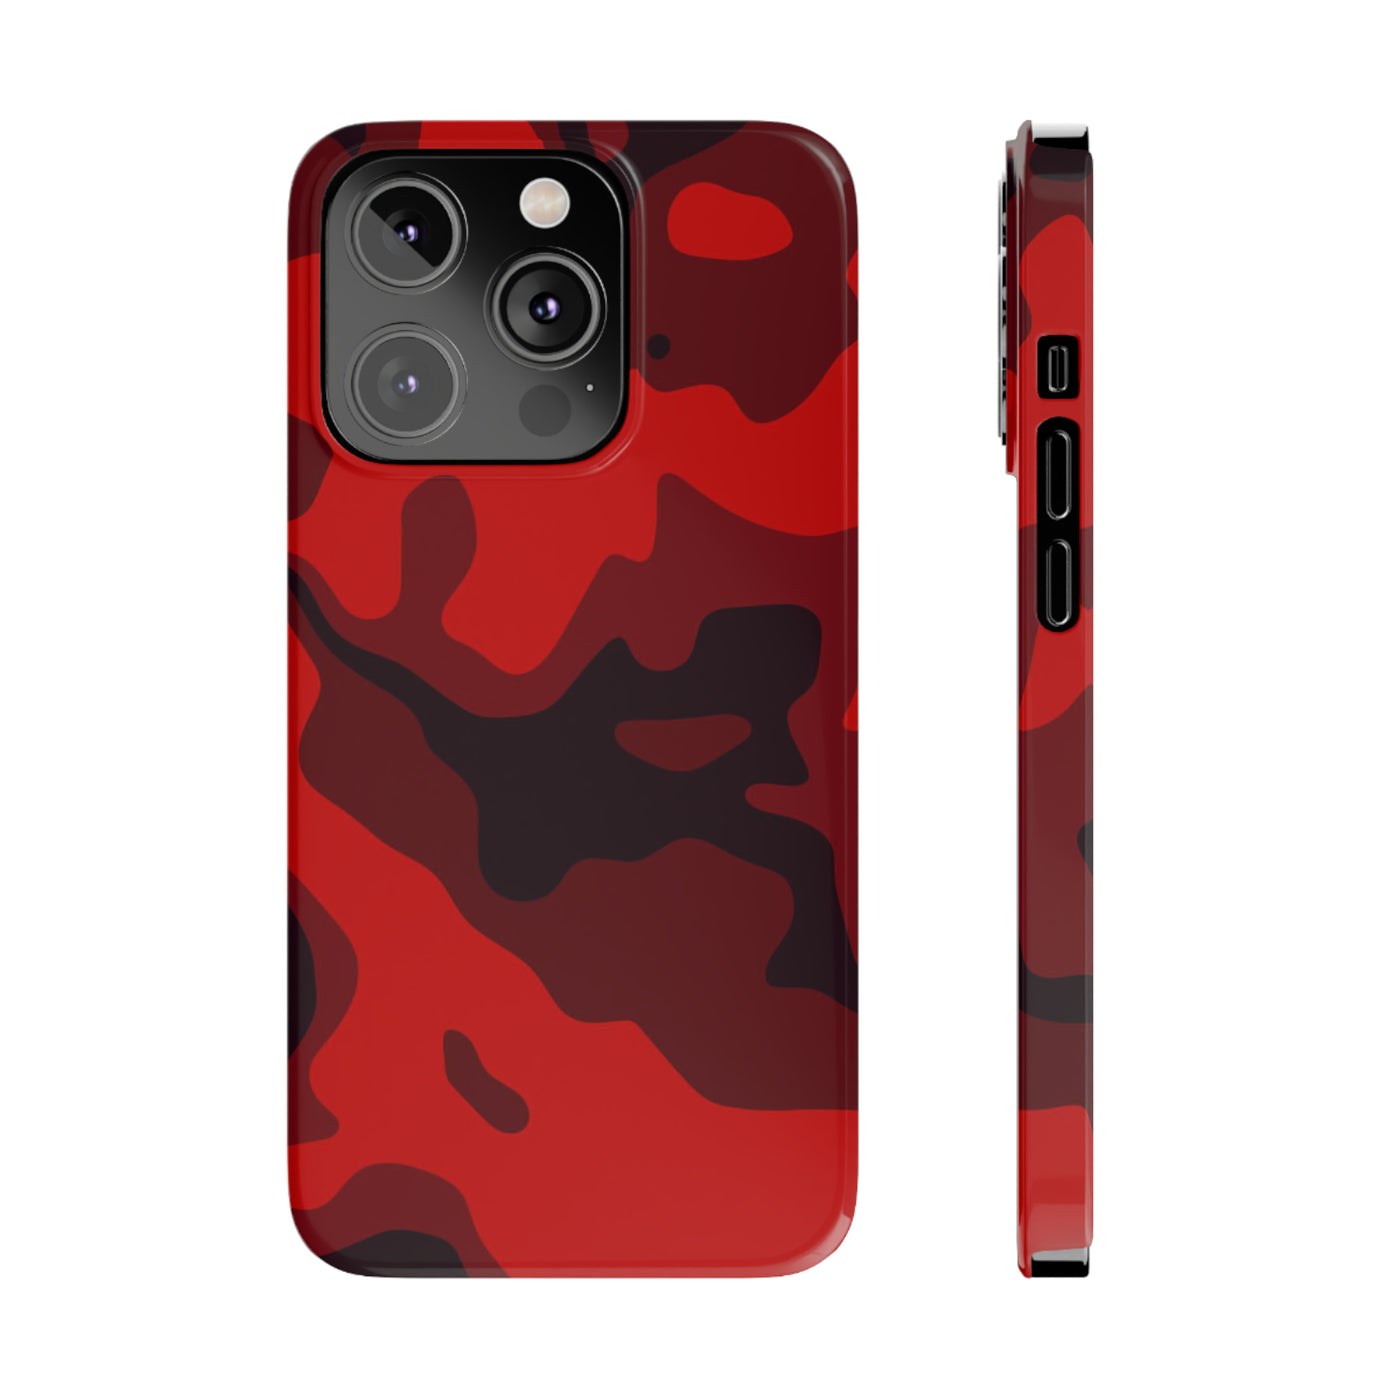 Slim Cute iPhone Cases - | iPhone 15 Case | iPhone 15 Pro Max Case, Iphone 14 Case, Iphone 14 Pro Max, Iphone 13, Red Camo Camouflage